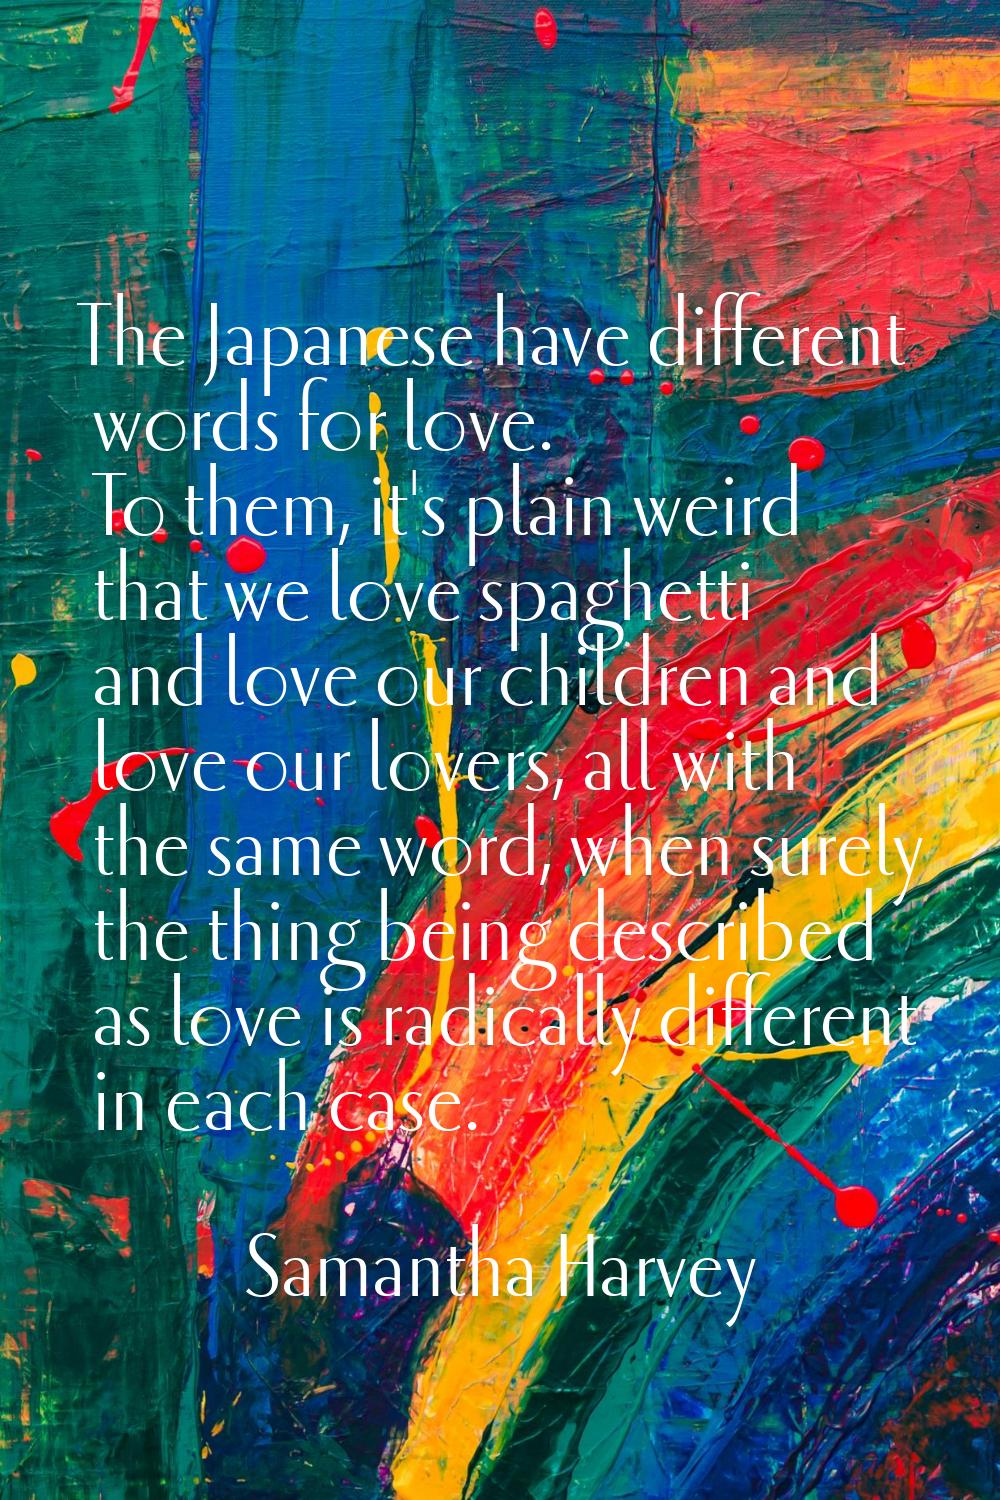 The Japanese have different words for love. To them, it's plain weird that we love spaghetti and lo